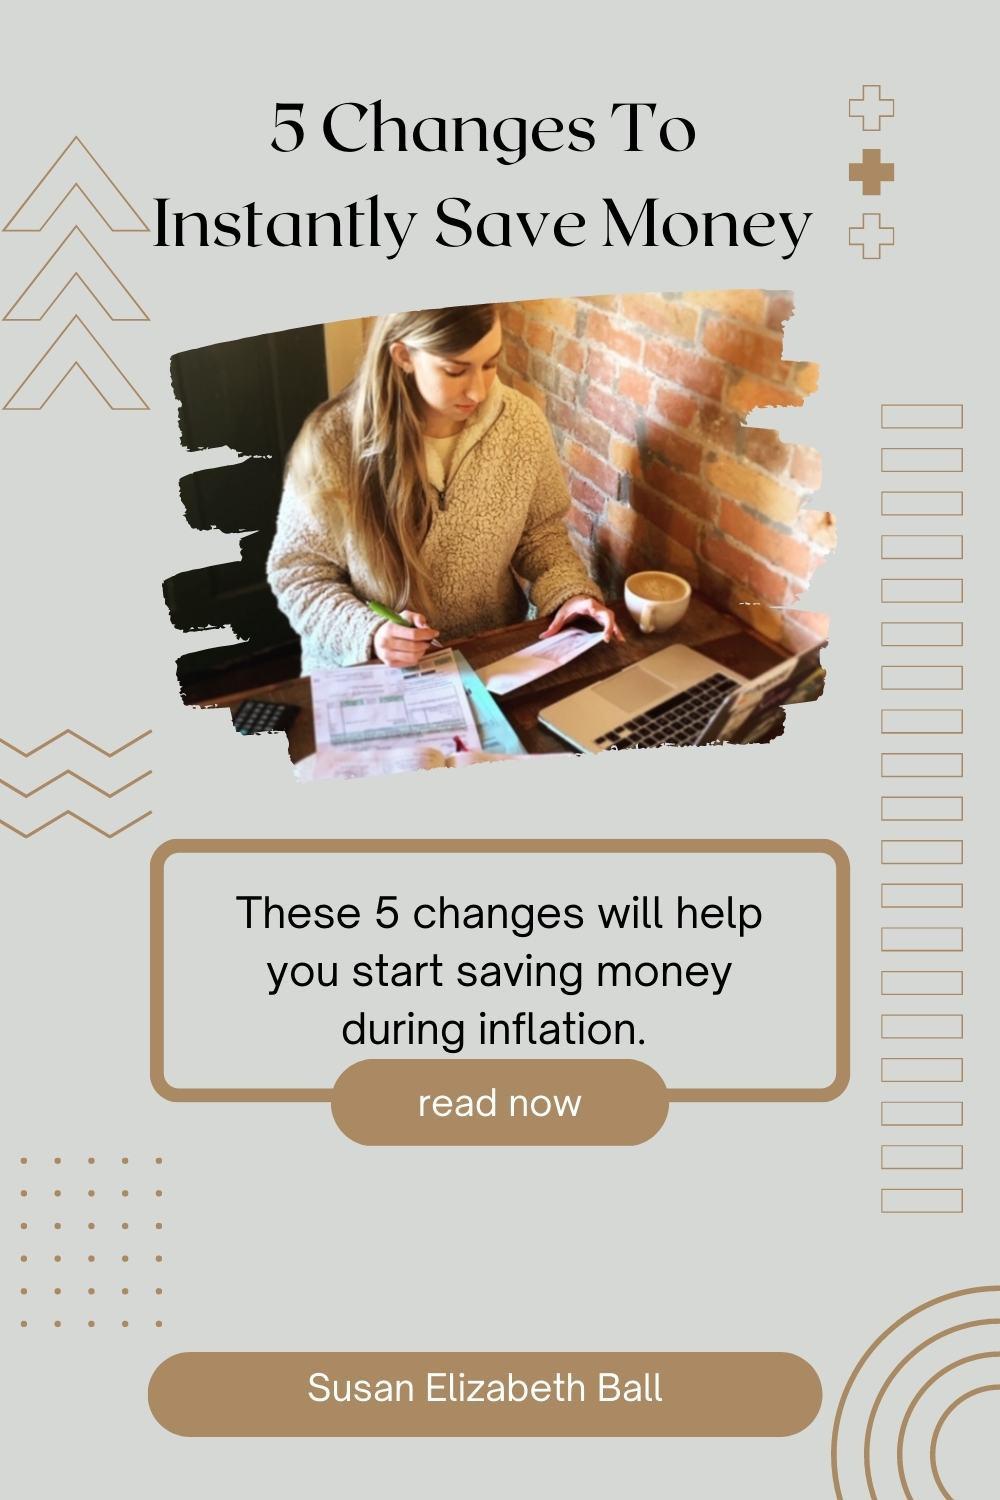 5 Changes To Instantly Save Money